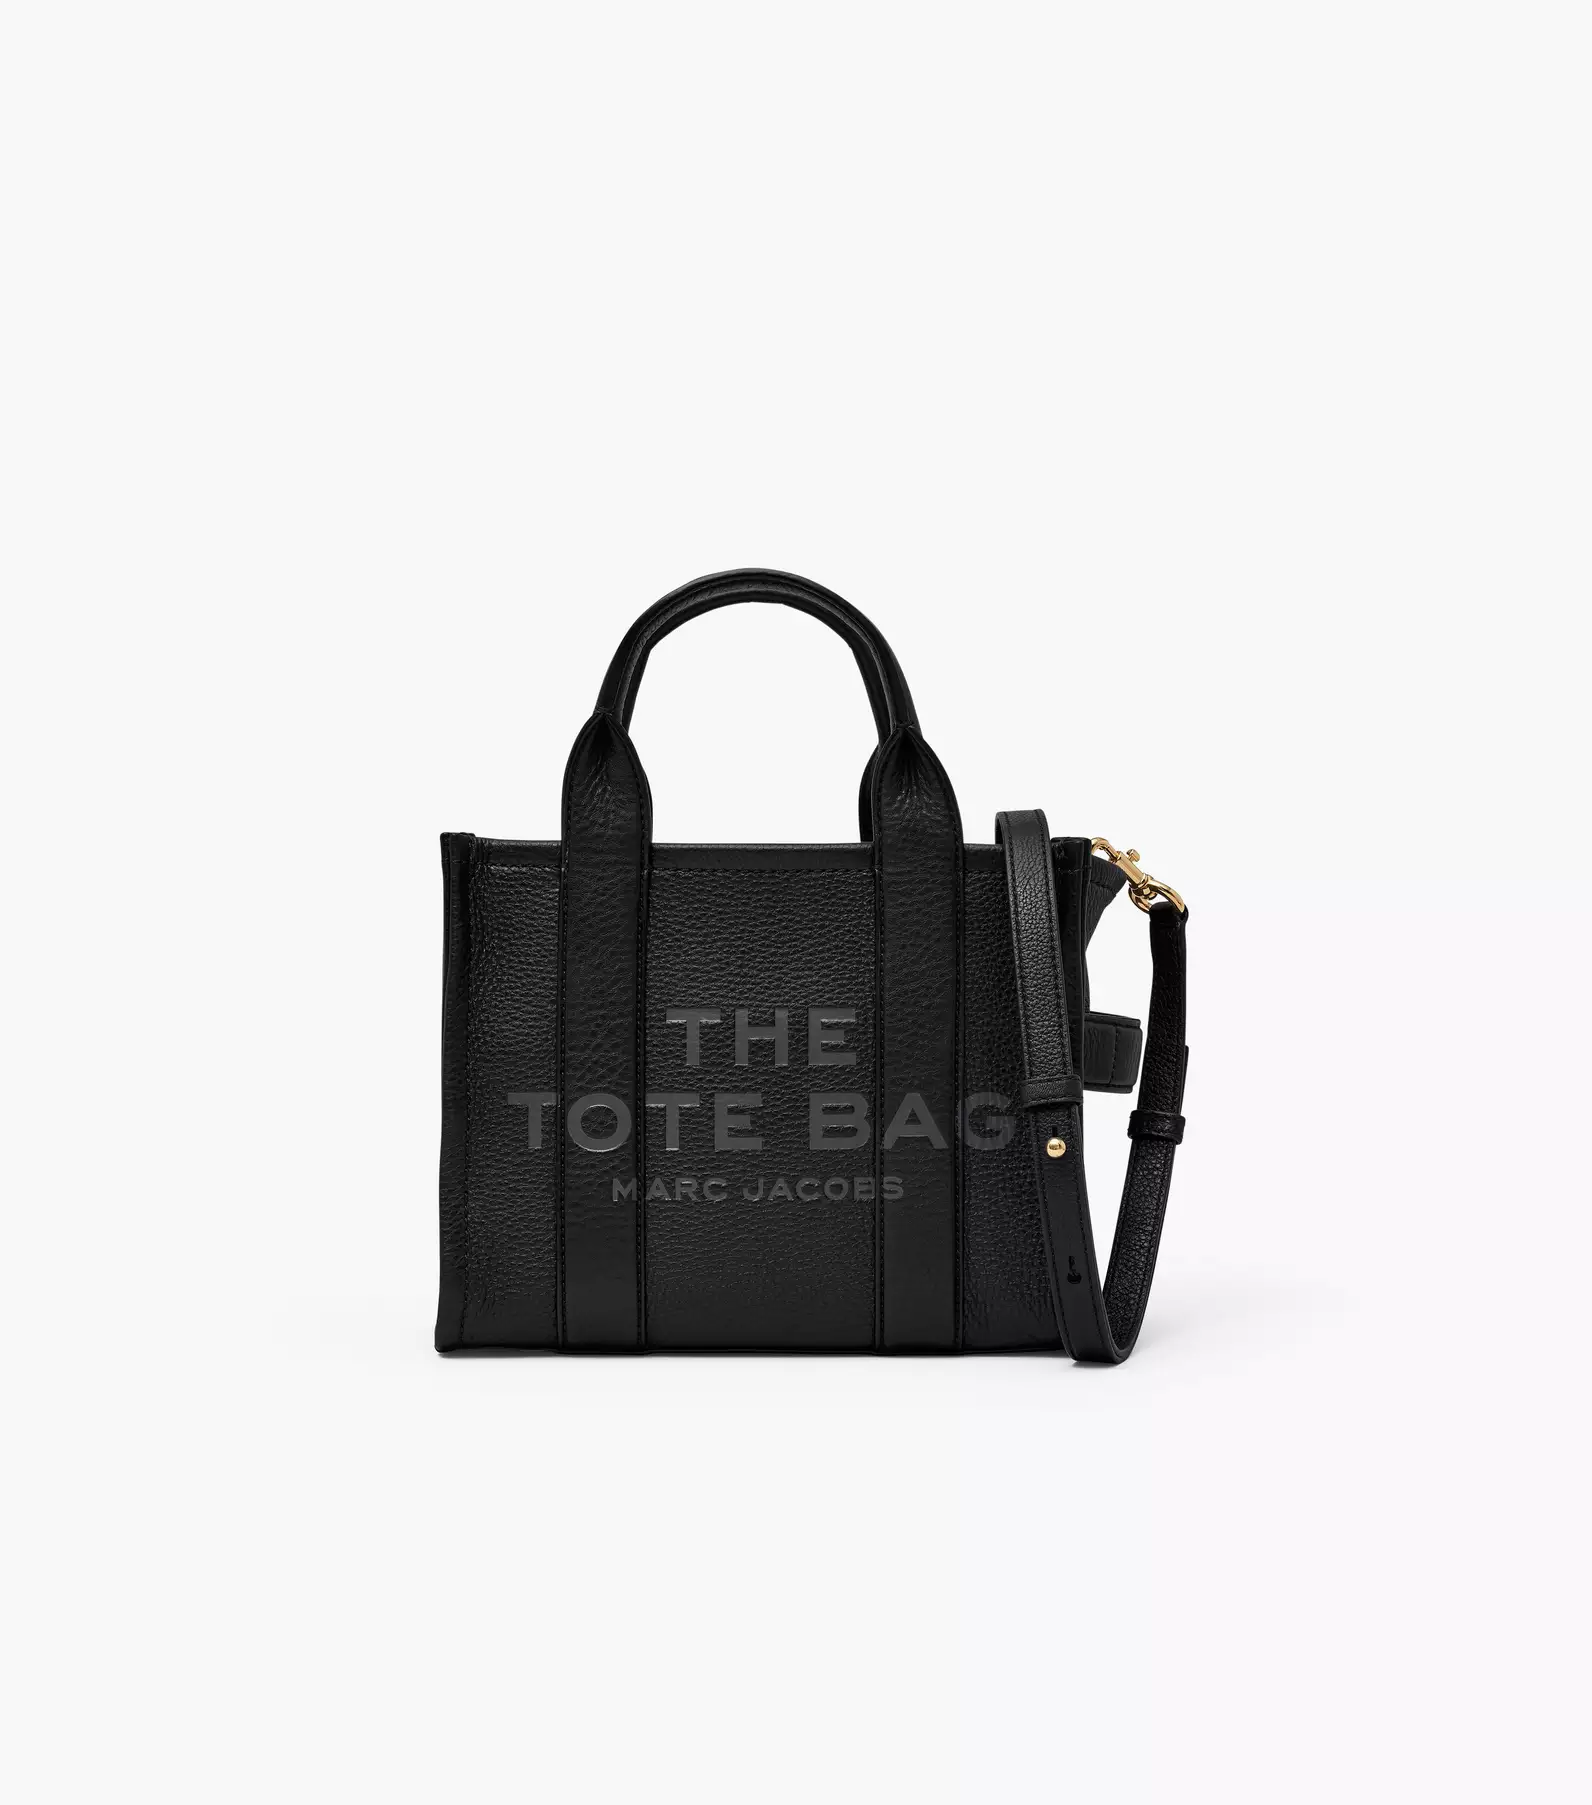 Marc Jacobsトートバッグ [THE TOTE NAG] 黒い革です